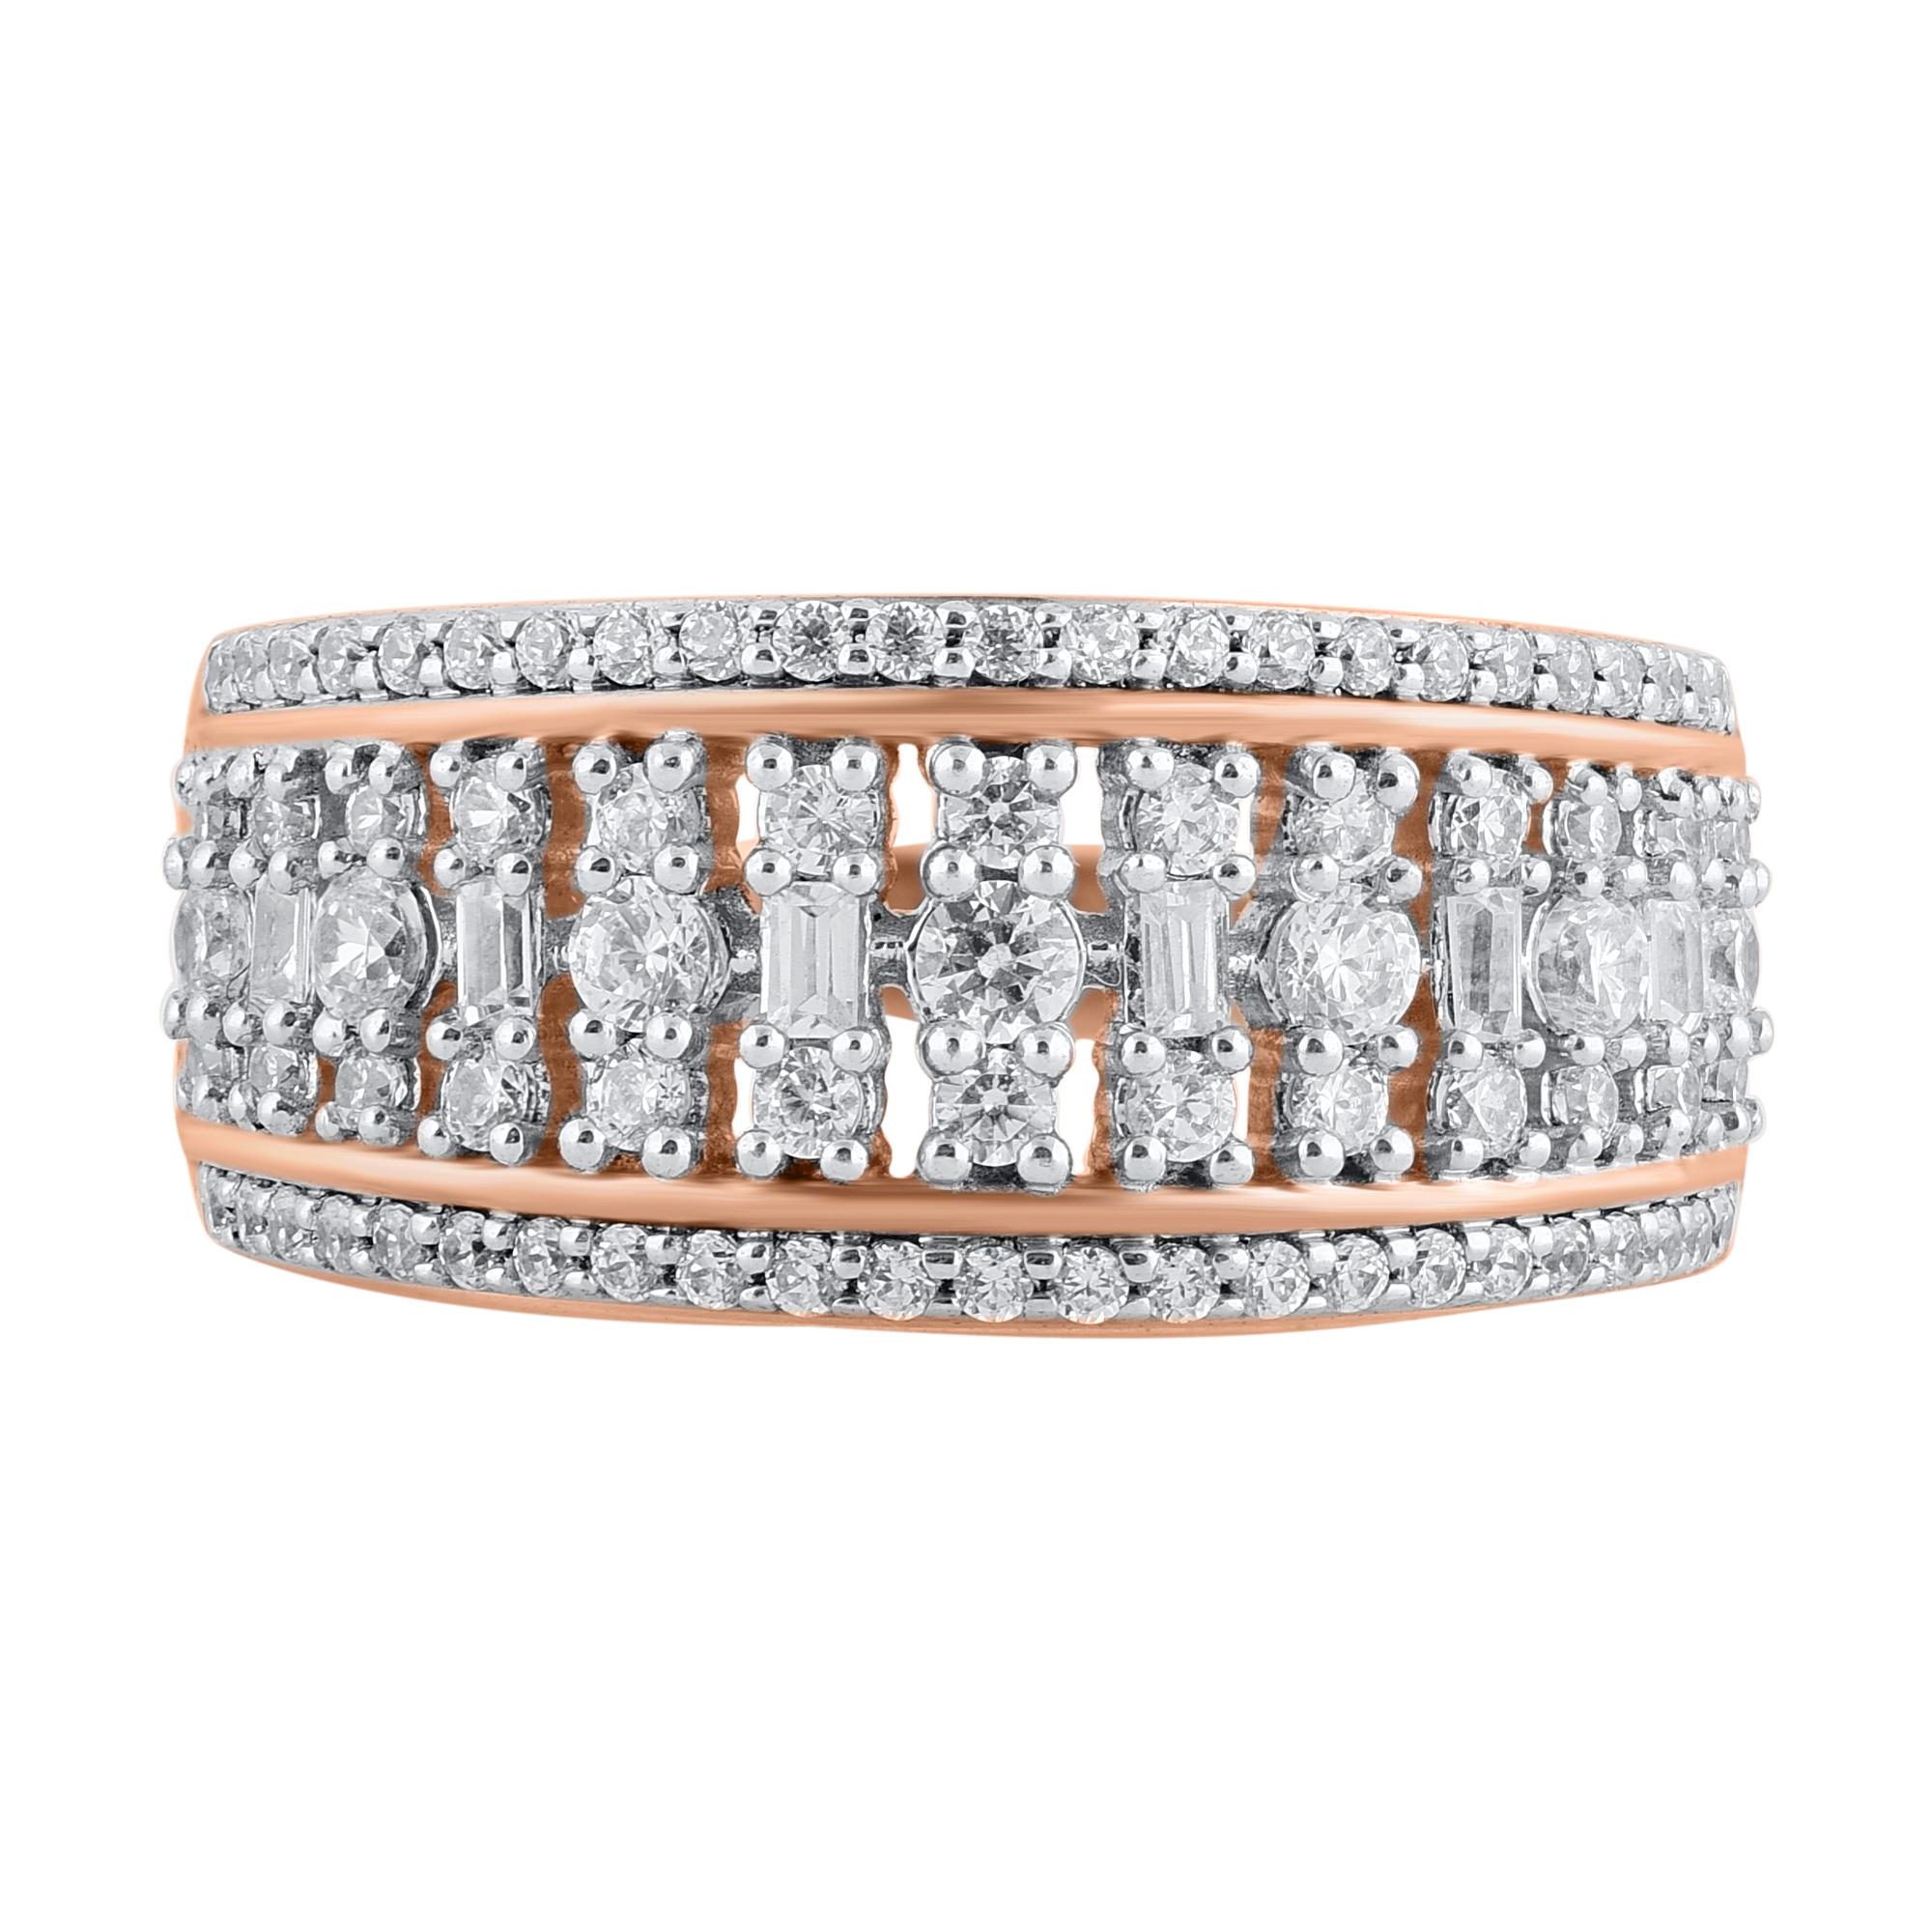 Contemporary TJD 1.0 Carat Round & Baguette Natural Diamond 18KT Rose Gold Wedding Band Ring For Sale